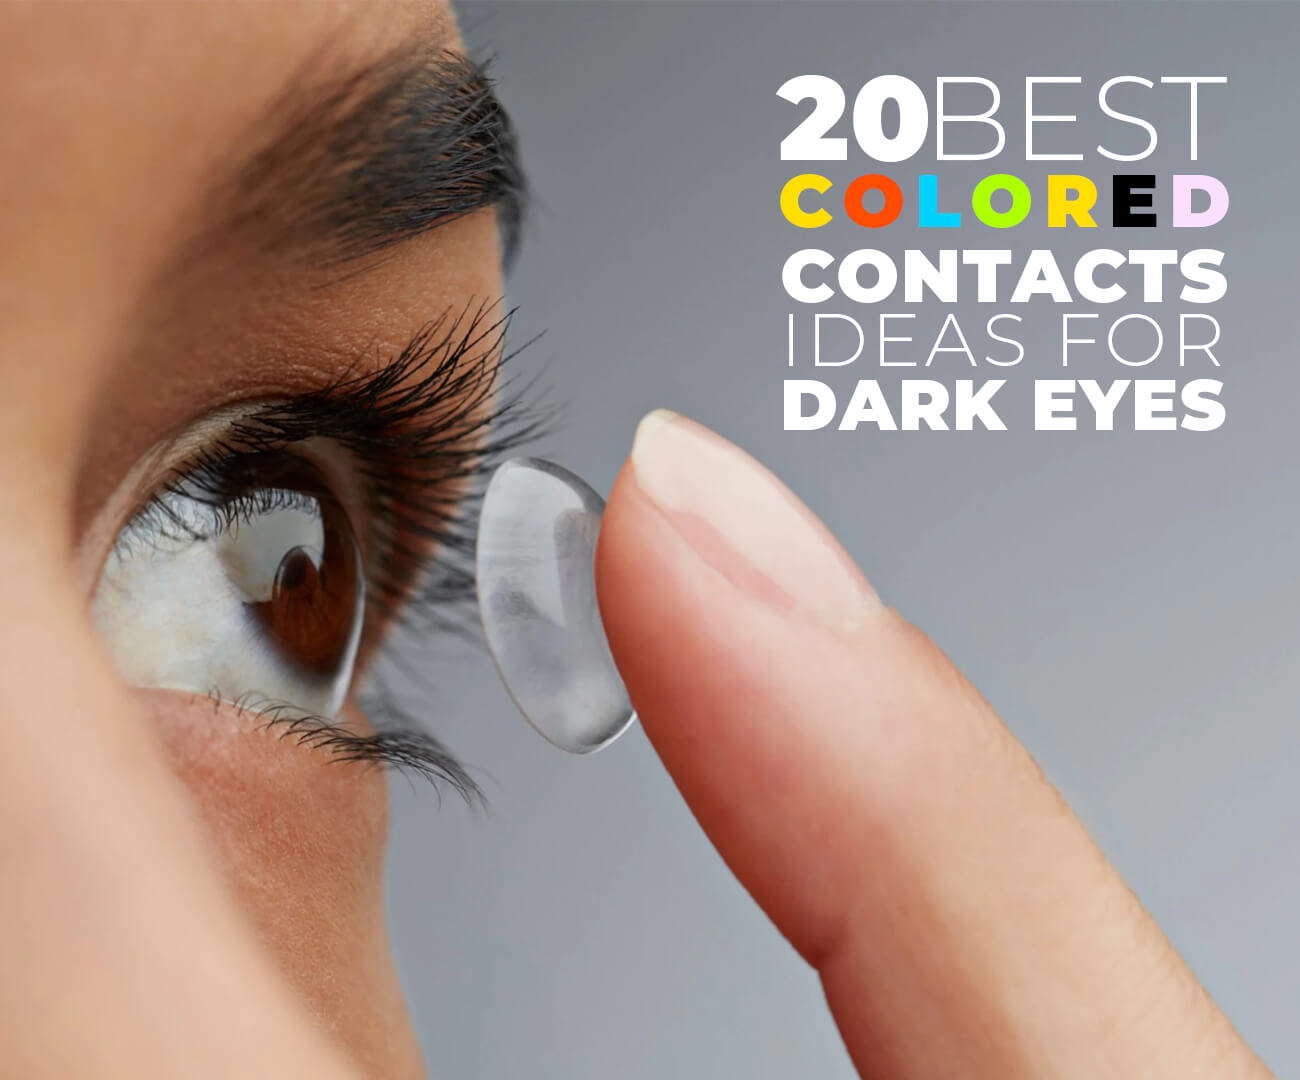 Colored Contacts For Dark Eyes